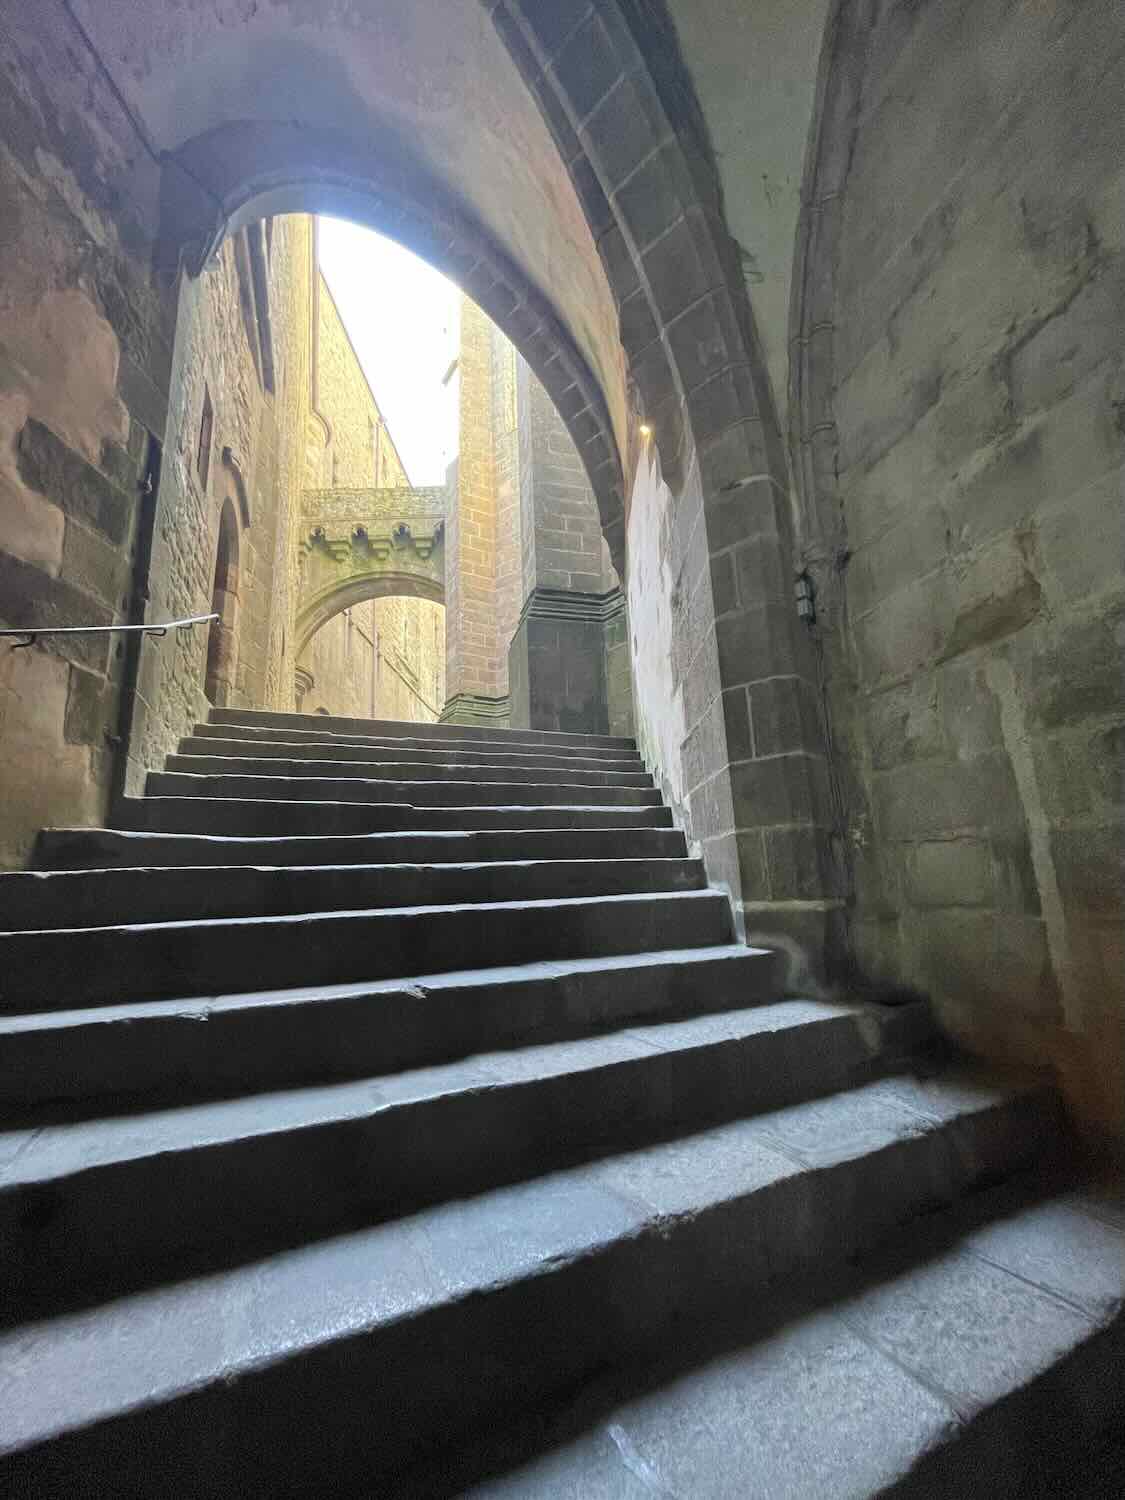 Atmospheric shot inside Mont Saint Michel showing a stone staircase leading upwards, framed by arches and illuminated by soft natural light.